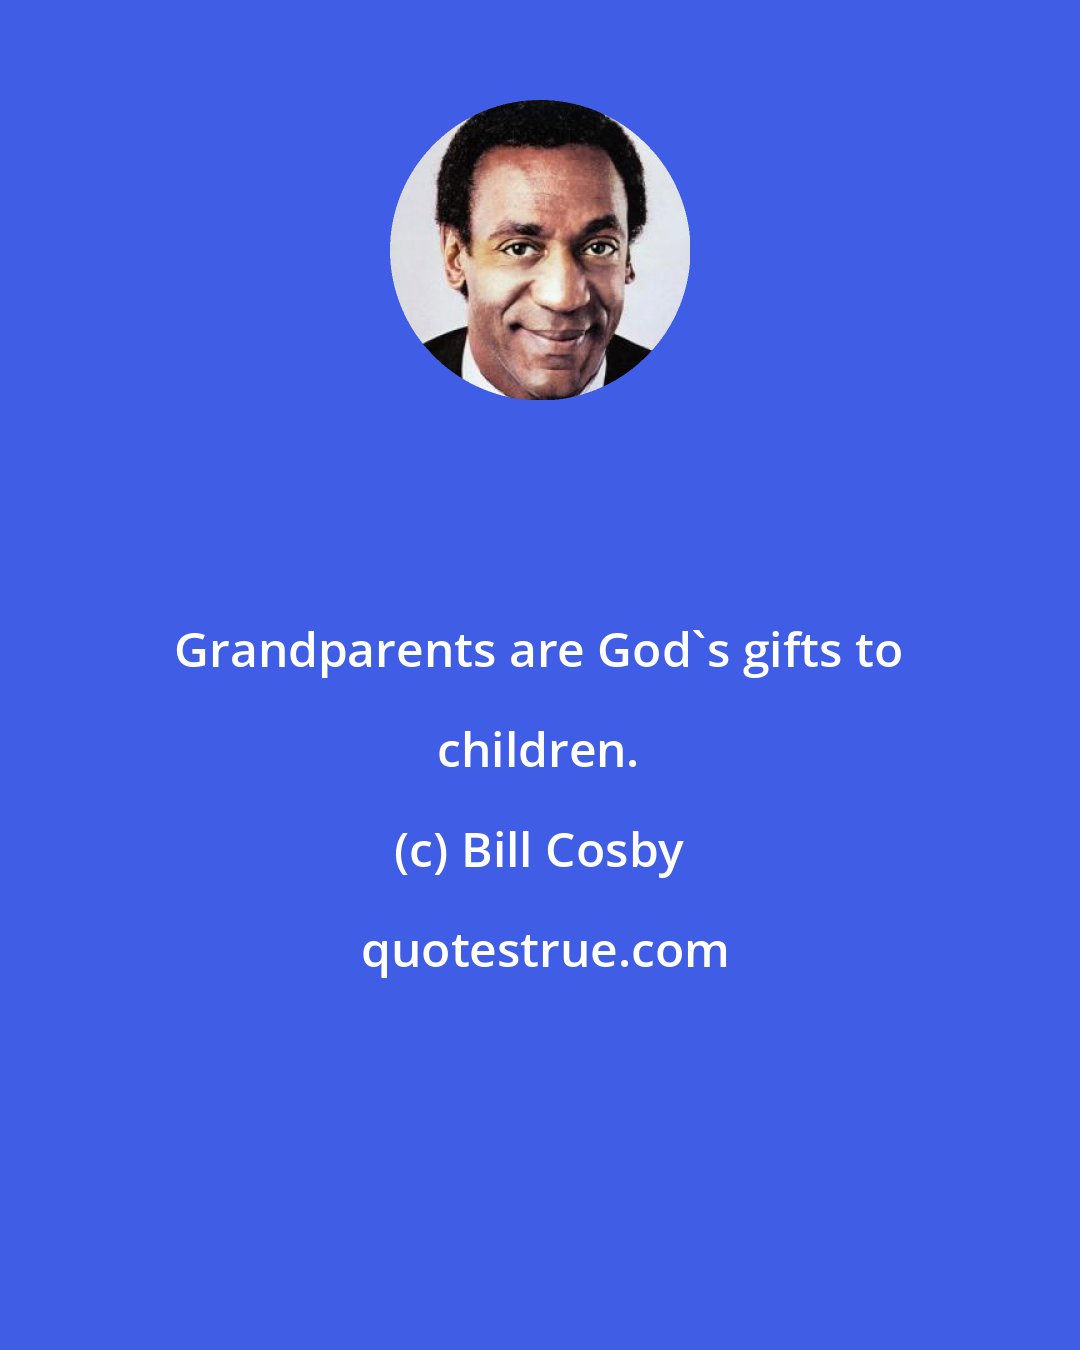 Bill Cosby: Grandparents are God's gifts to children.